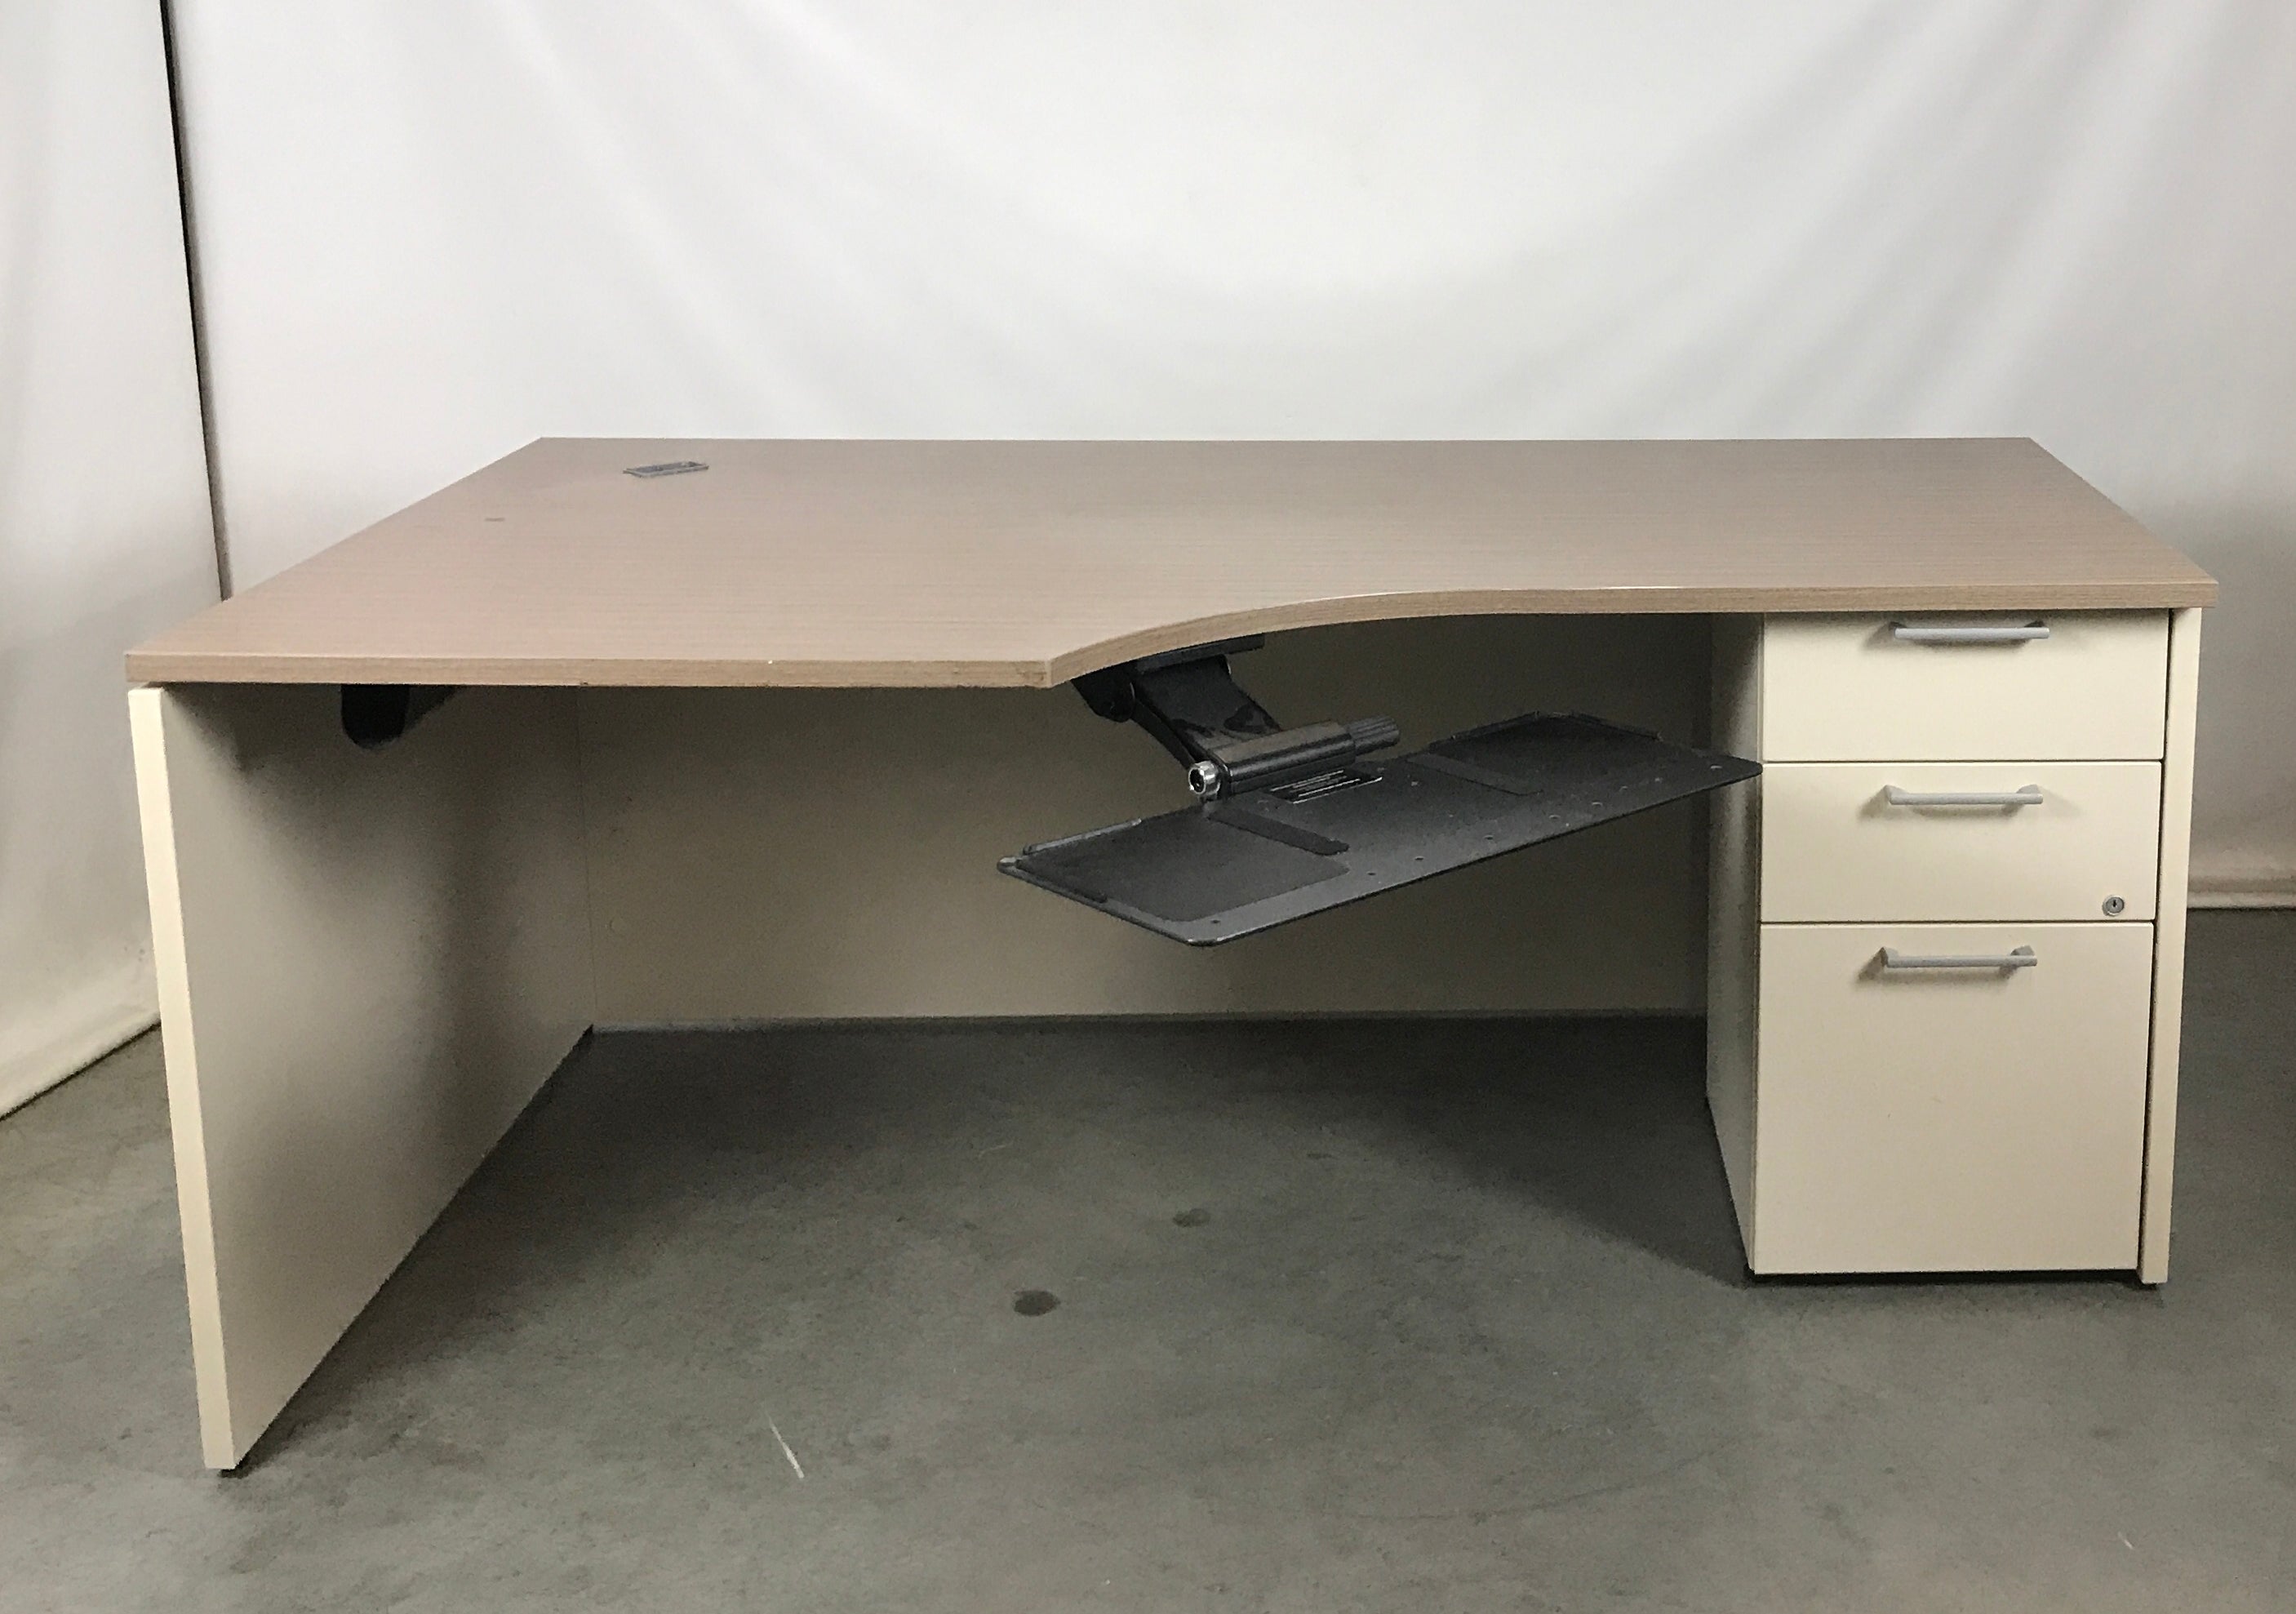 Lacasse Desk with Keyboard Attachment